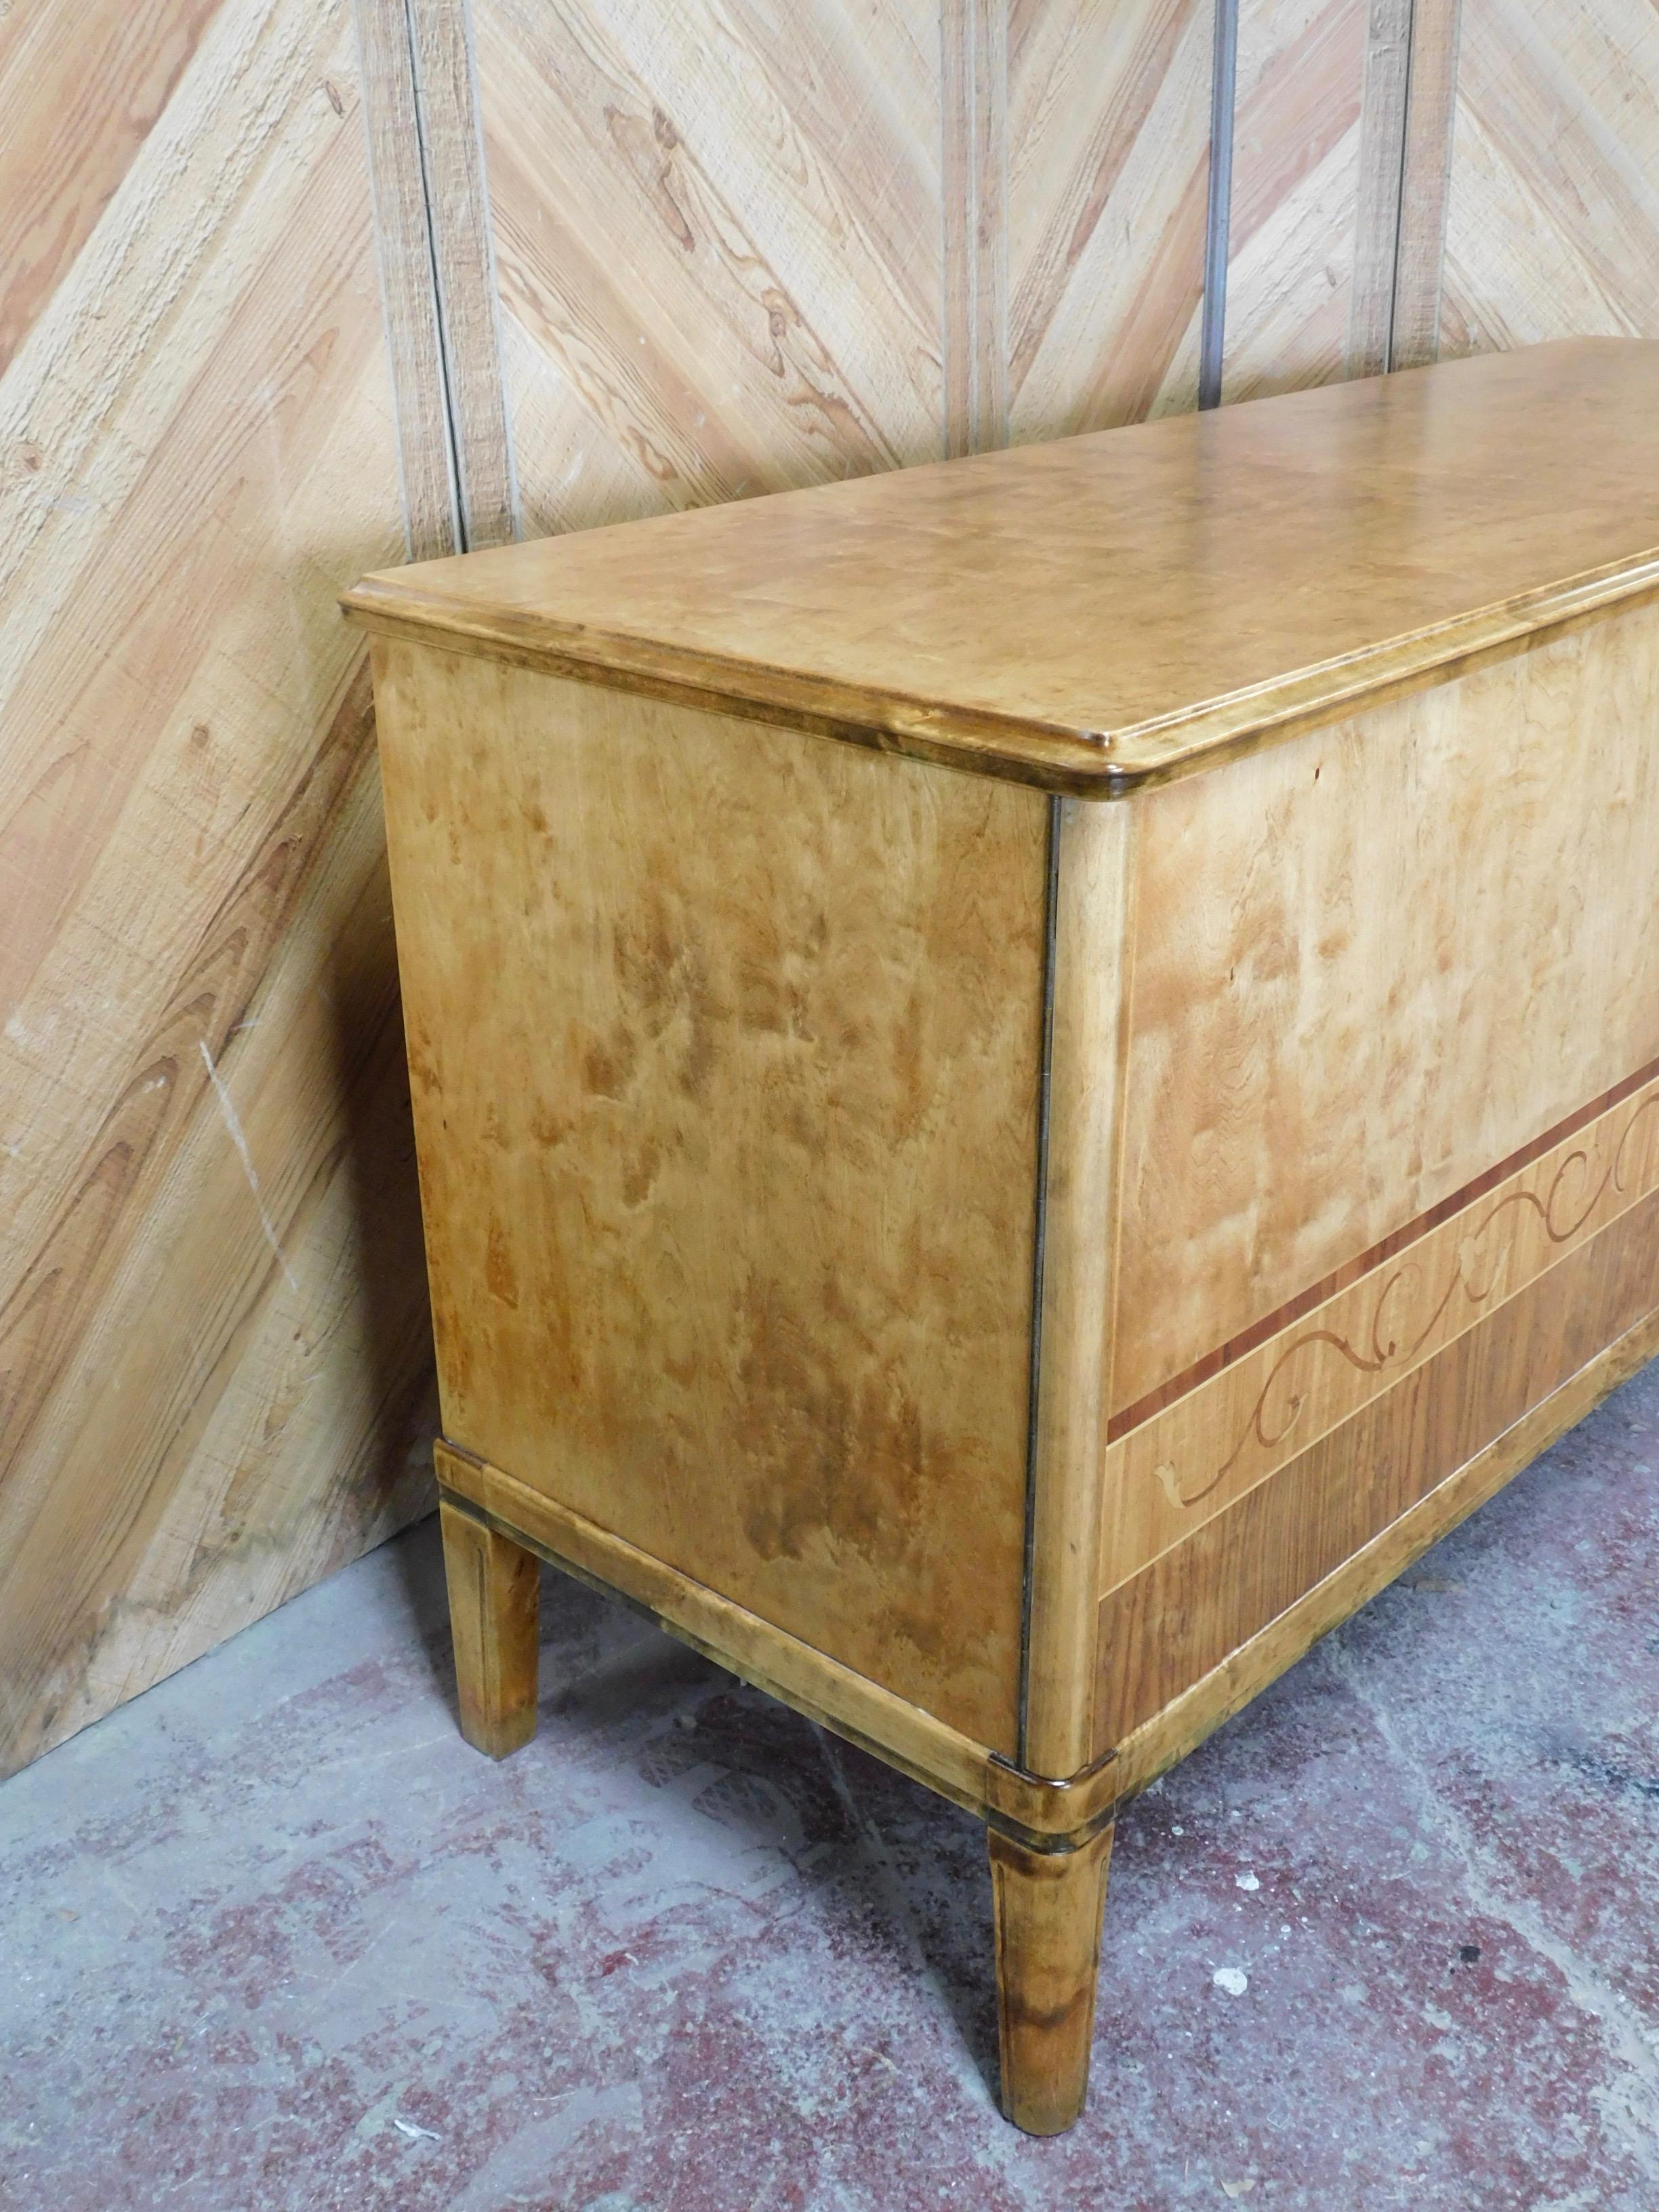 Swedish Art Deco Sideboard Cabinet in Golden Birch with Rosewood Inlay, 1930s For Sale 2